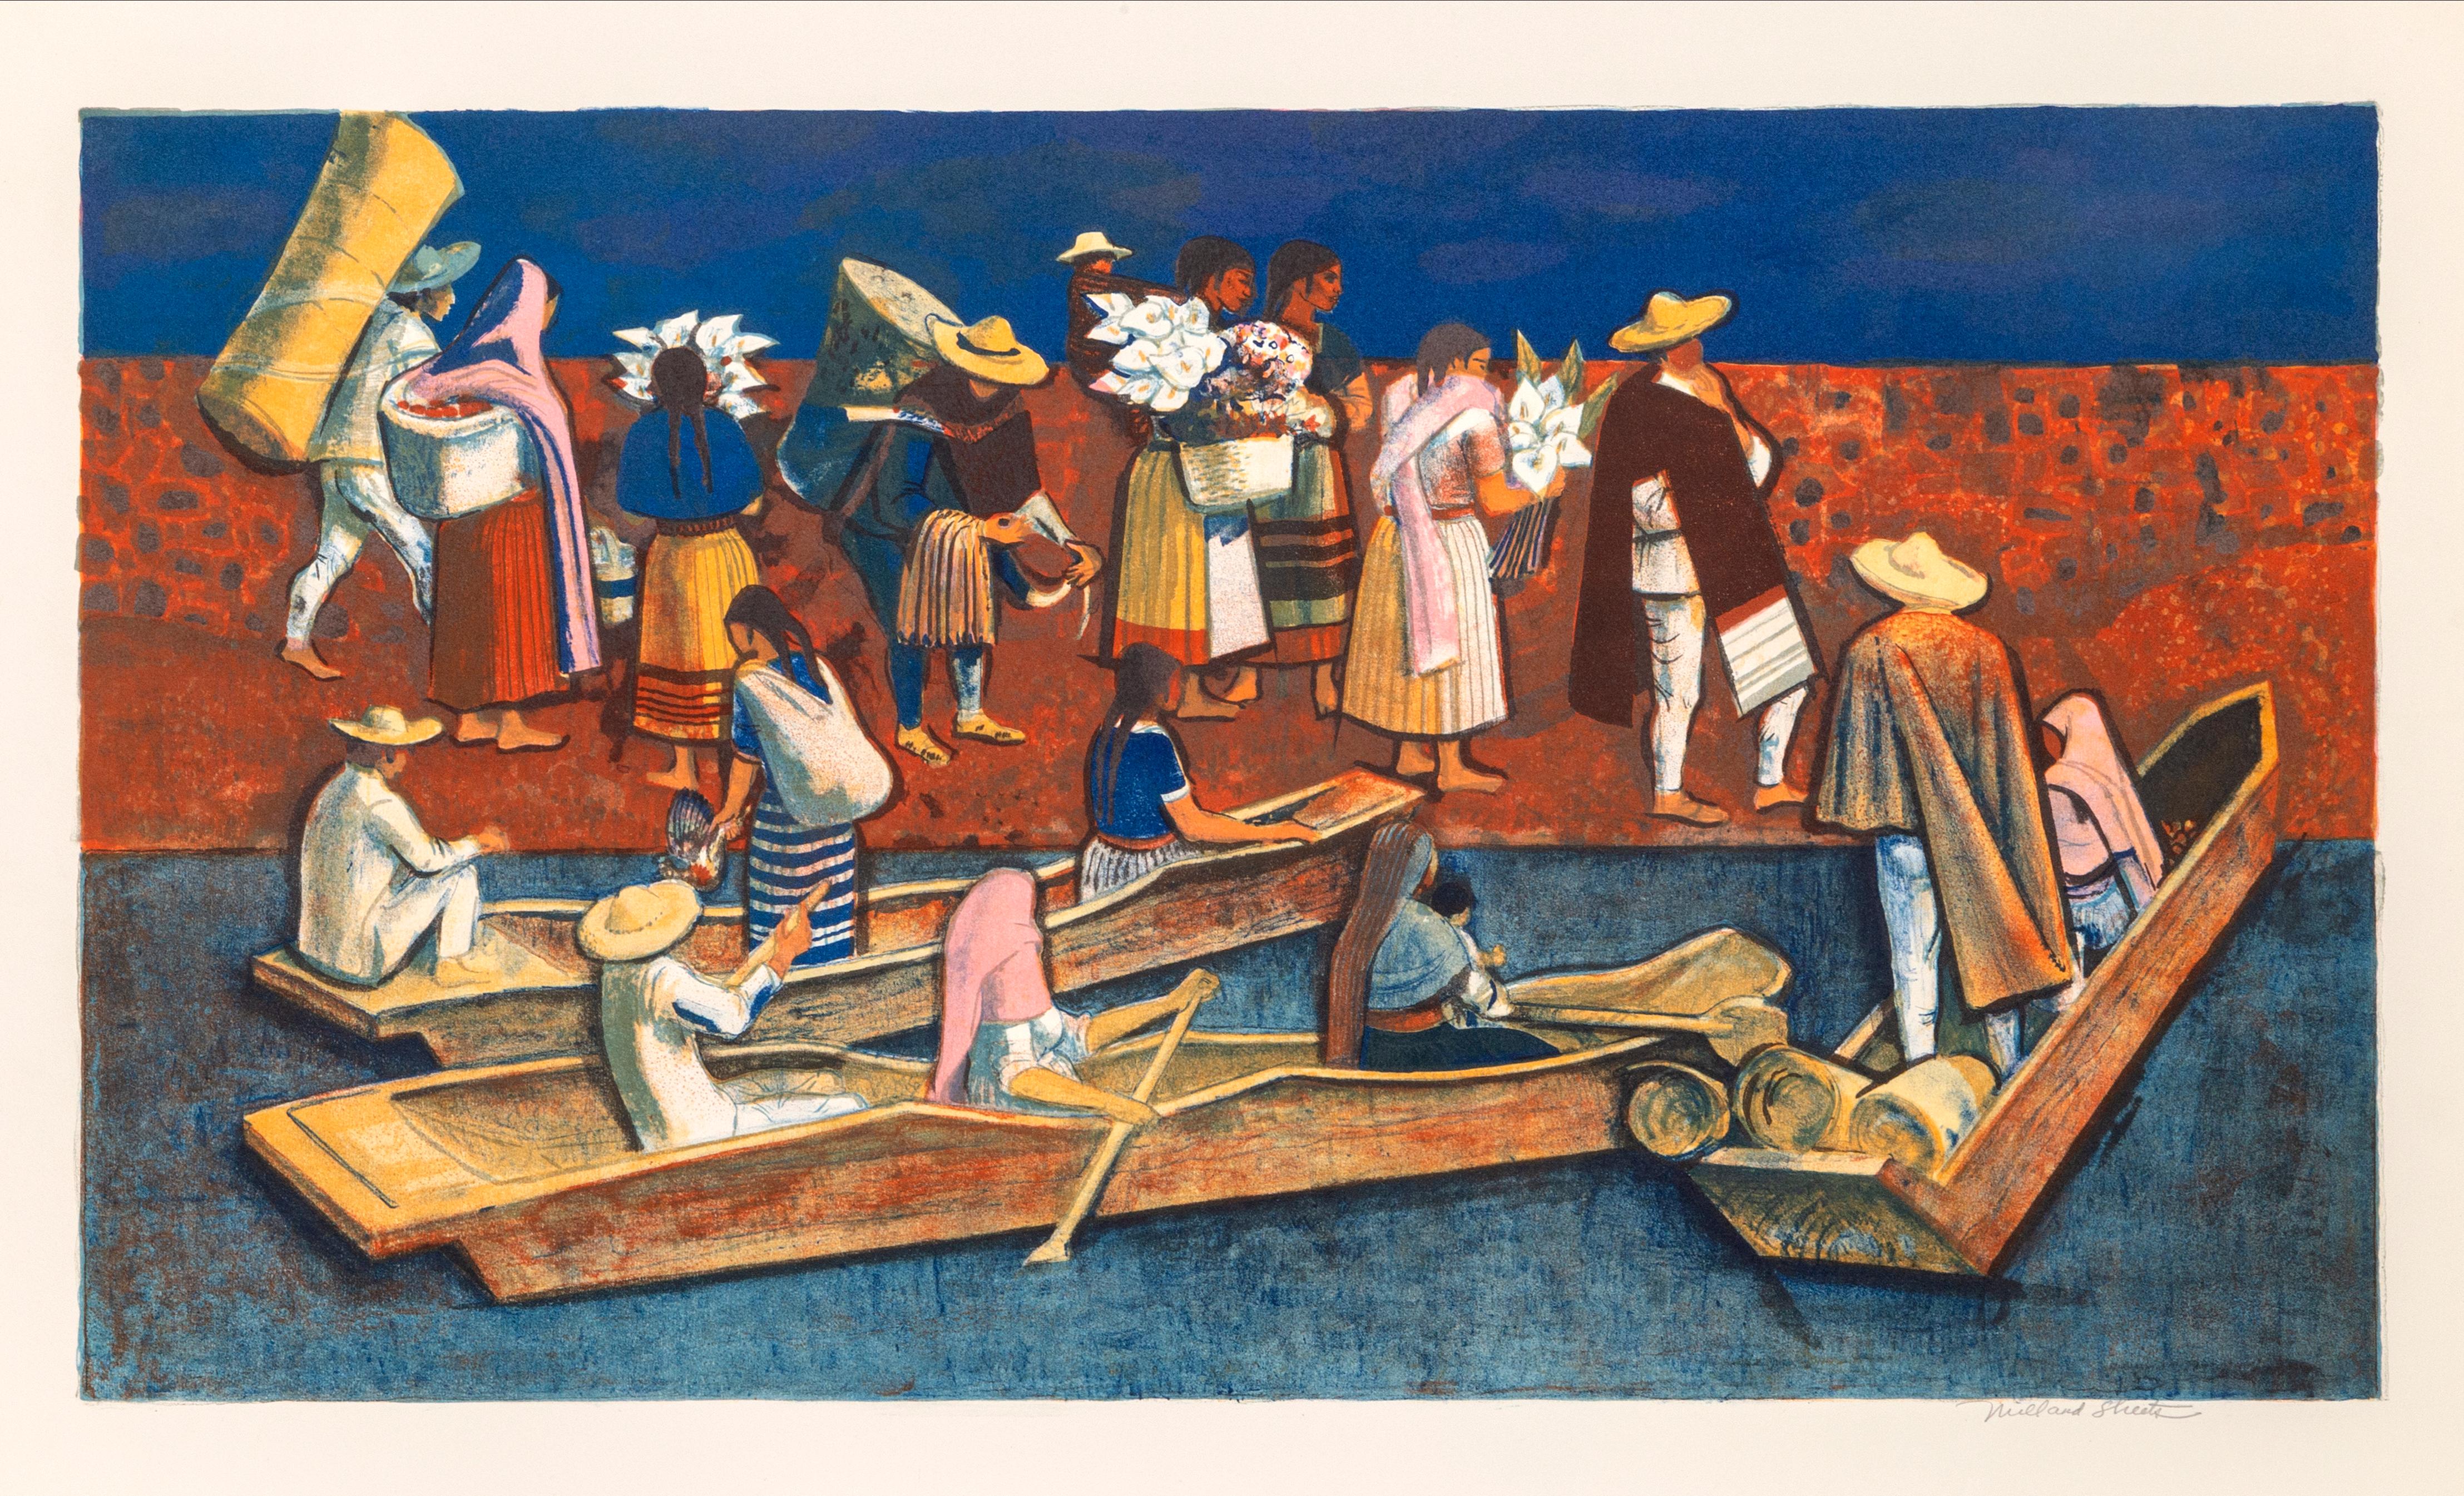 Mexican Travelers by Millard Owen Sheets, American (1907–1989)
Date: Circa 1977
Lithograph on Arches paper, signed and numbered in pencil
Edition of 250
Size: 24 in. x 35 in. (60.96 cm x 88.9 cm)